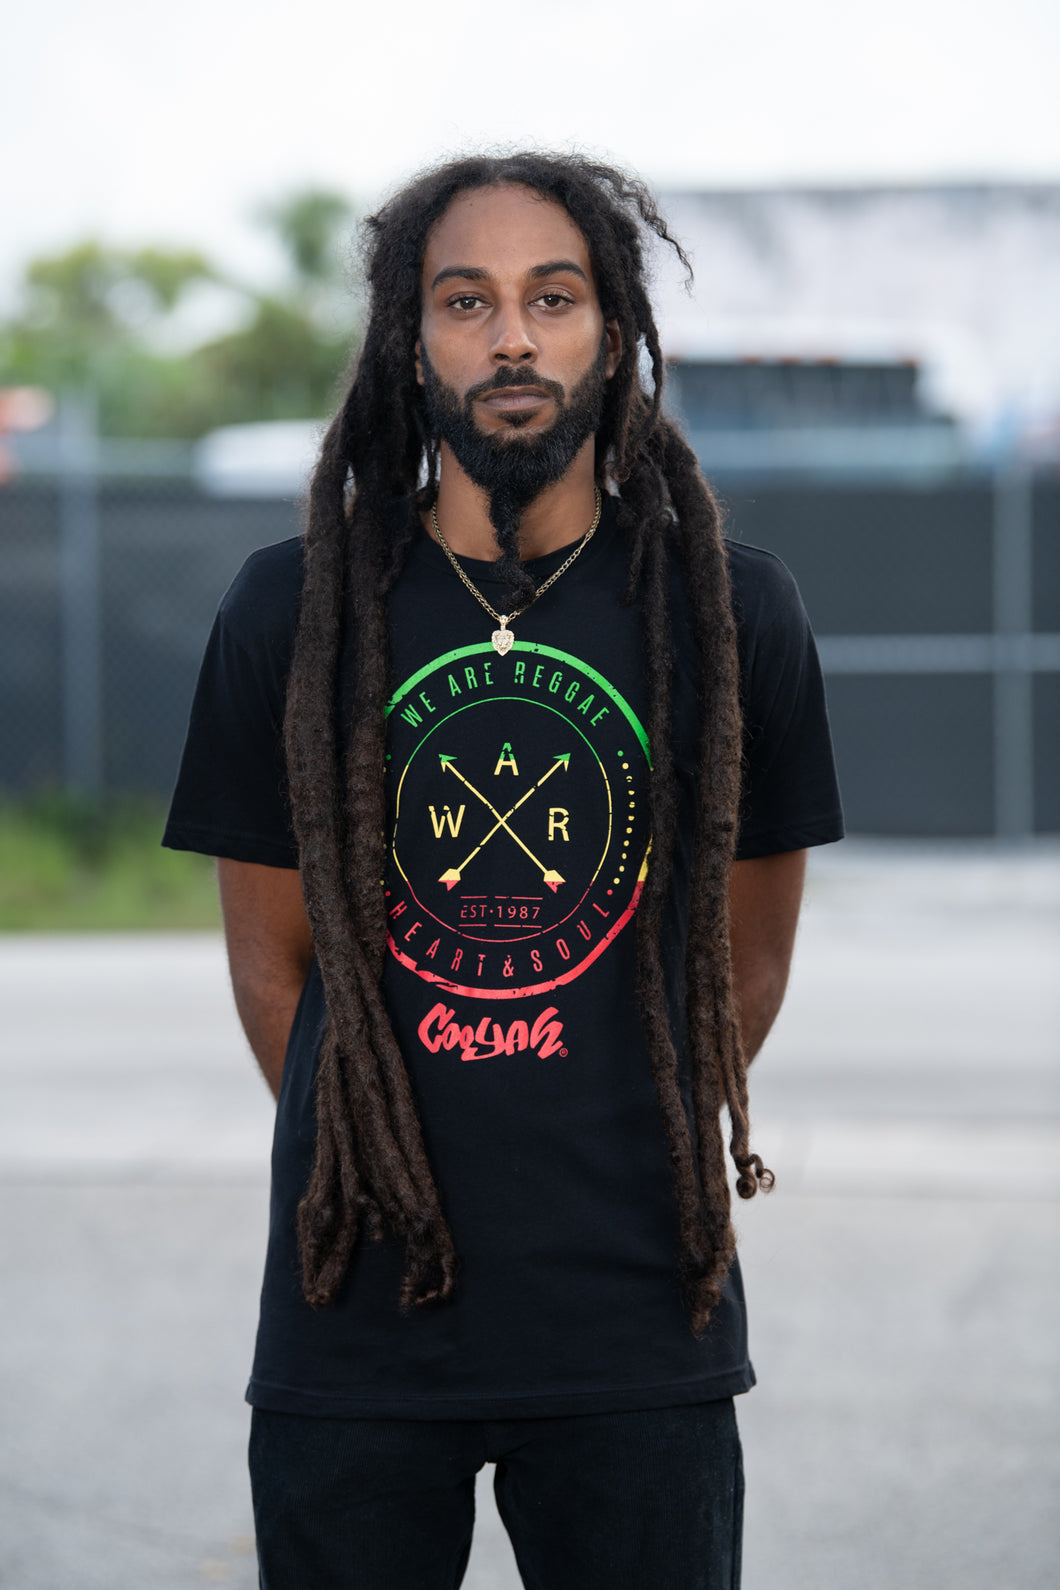 We Are Reggae men's graphic tee by Cooyah.   Available worldwide at Cooyah.com